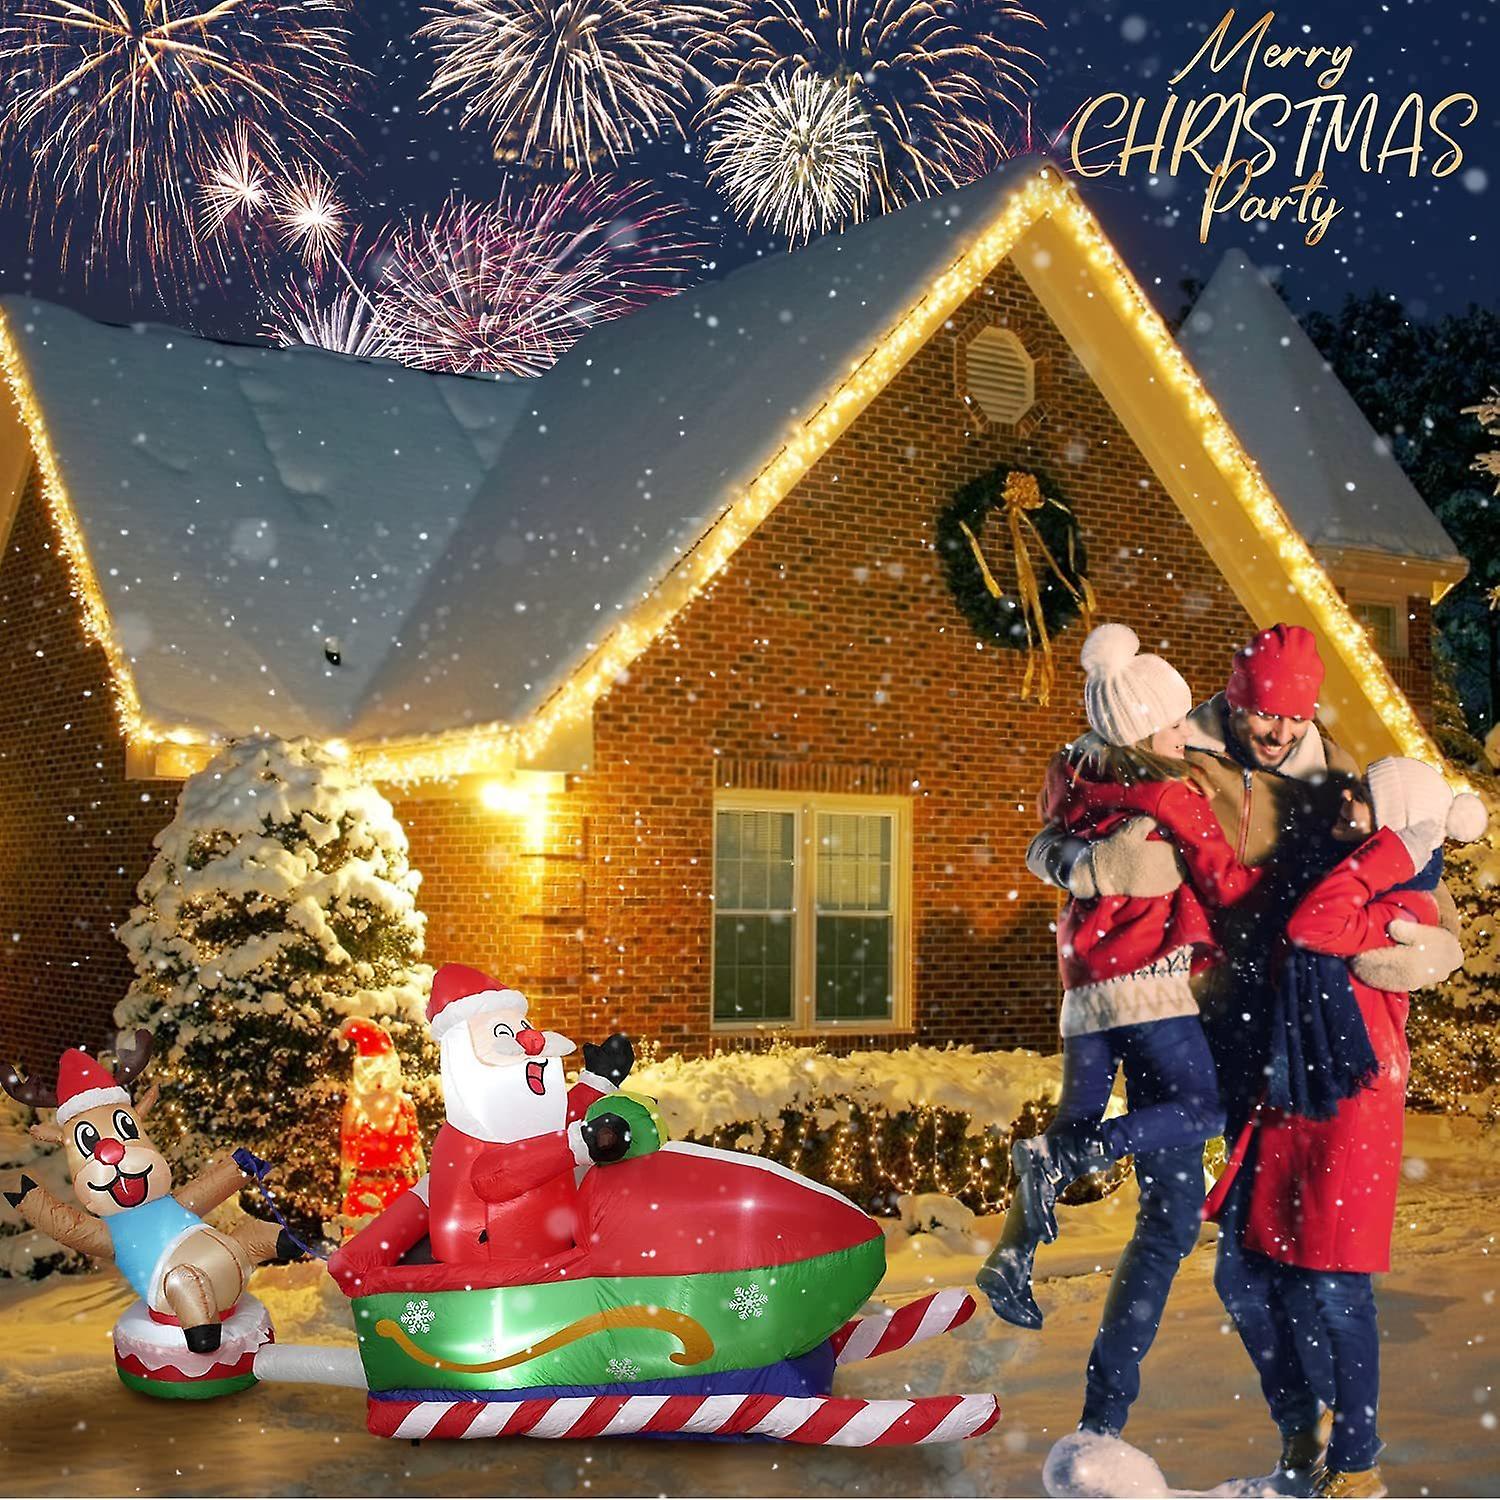 8 Ft Christmas Inflatables Outdoor Decorations ， Inflatable Christmas Blow Up Outdoor Yard Decorations， Snowmobile Santa Claus And Reindeer Sleigh Wit